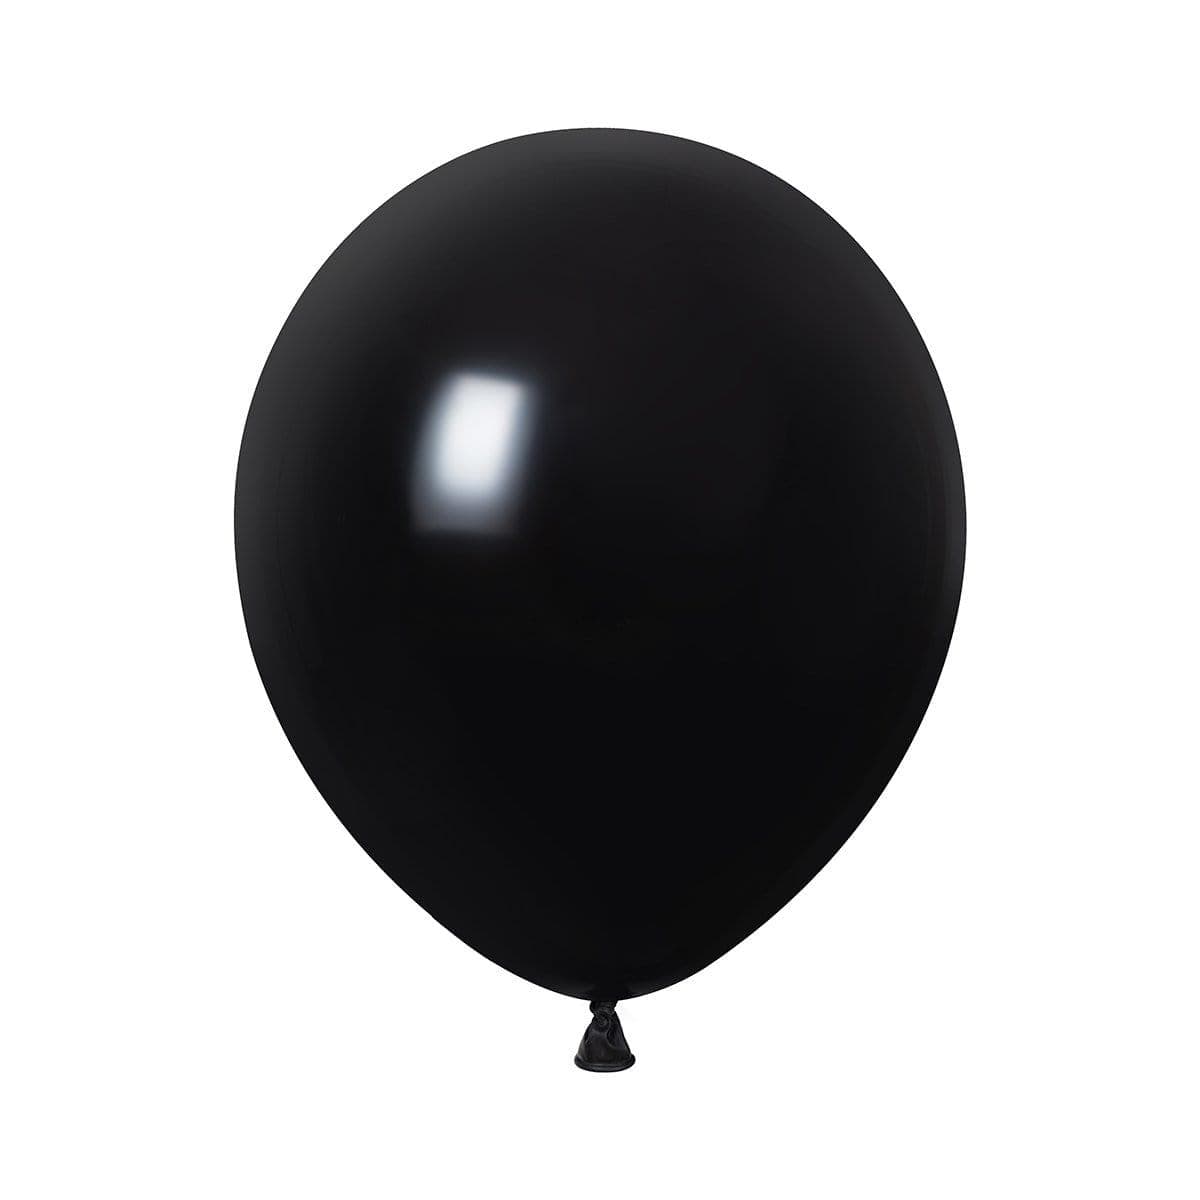 Buy Balloons Black Latex Balloon 5 Inches, 100 Count sold at Party Expert